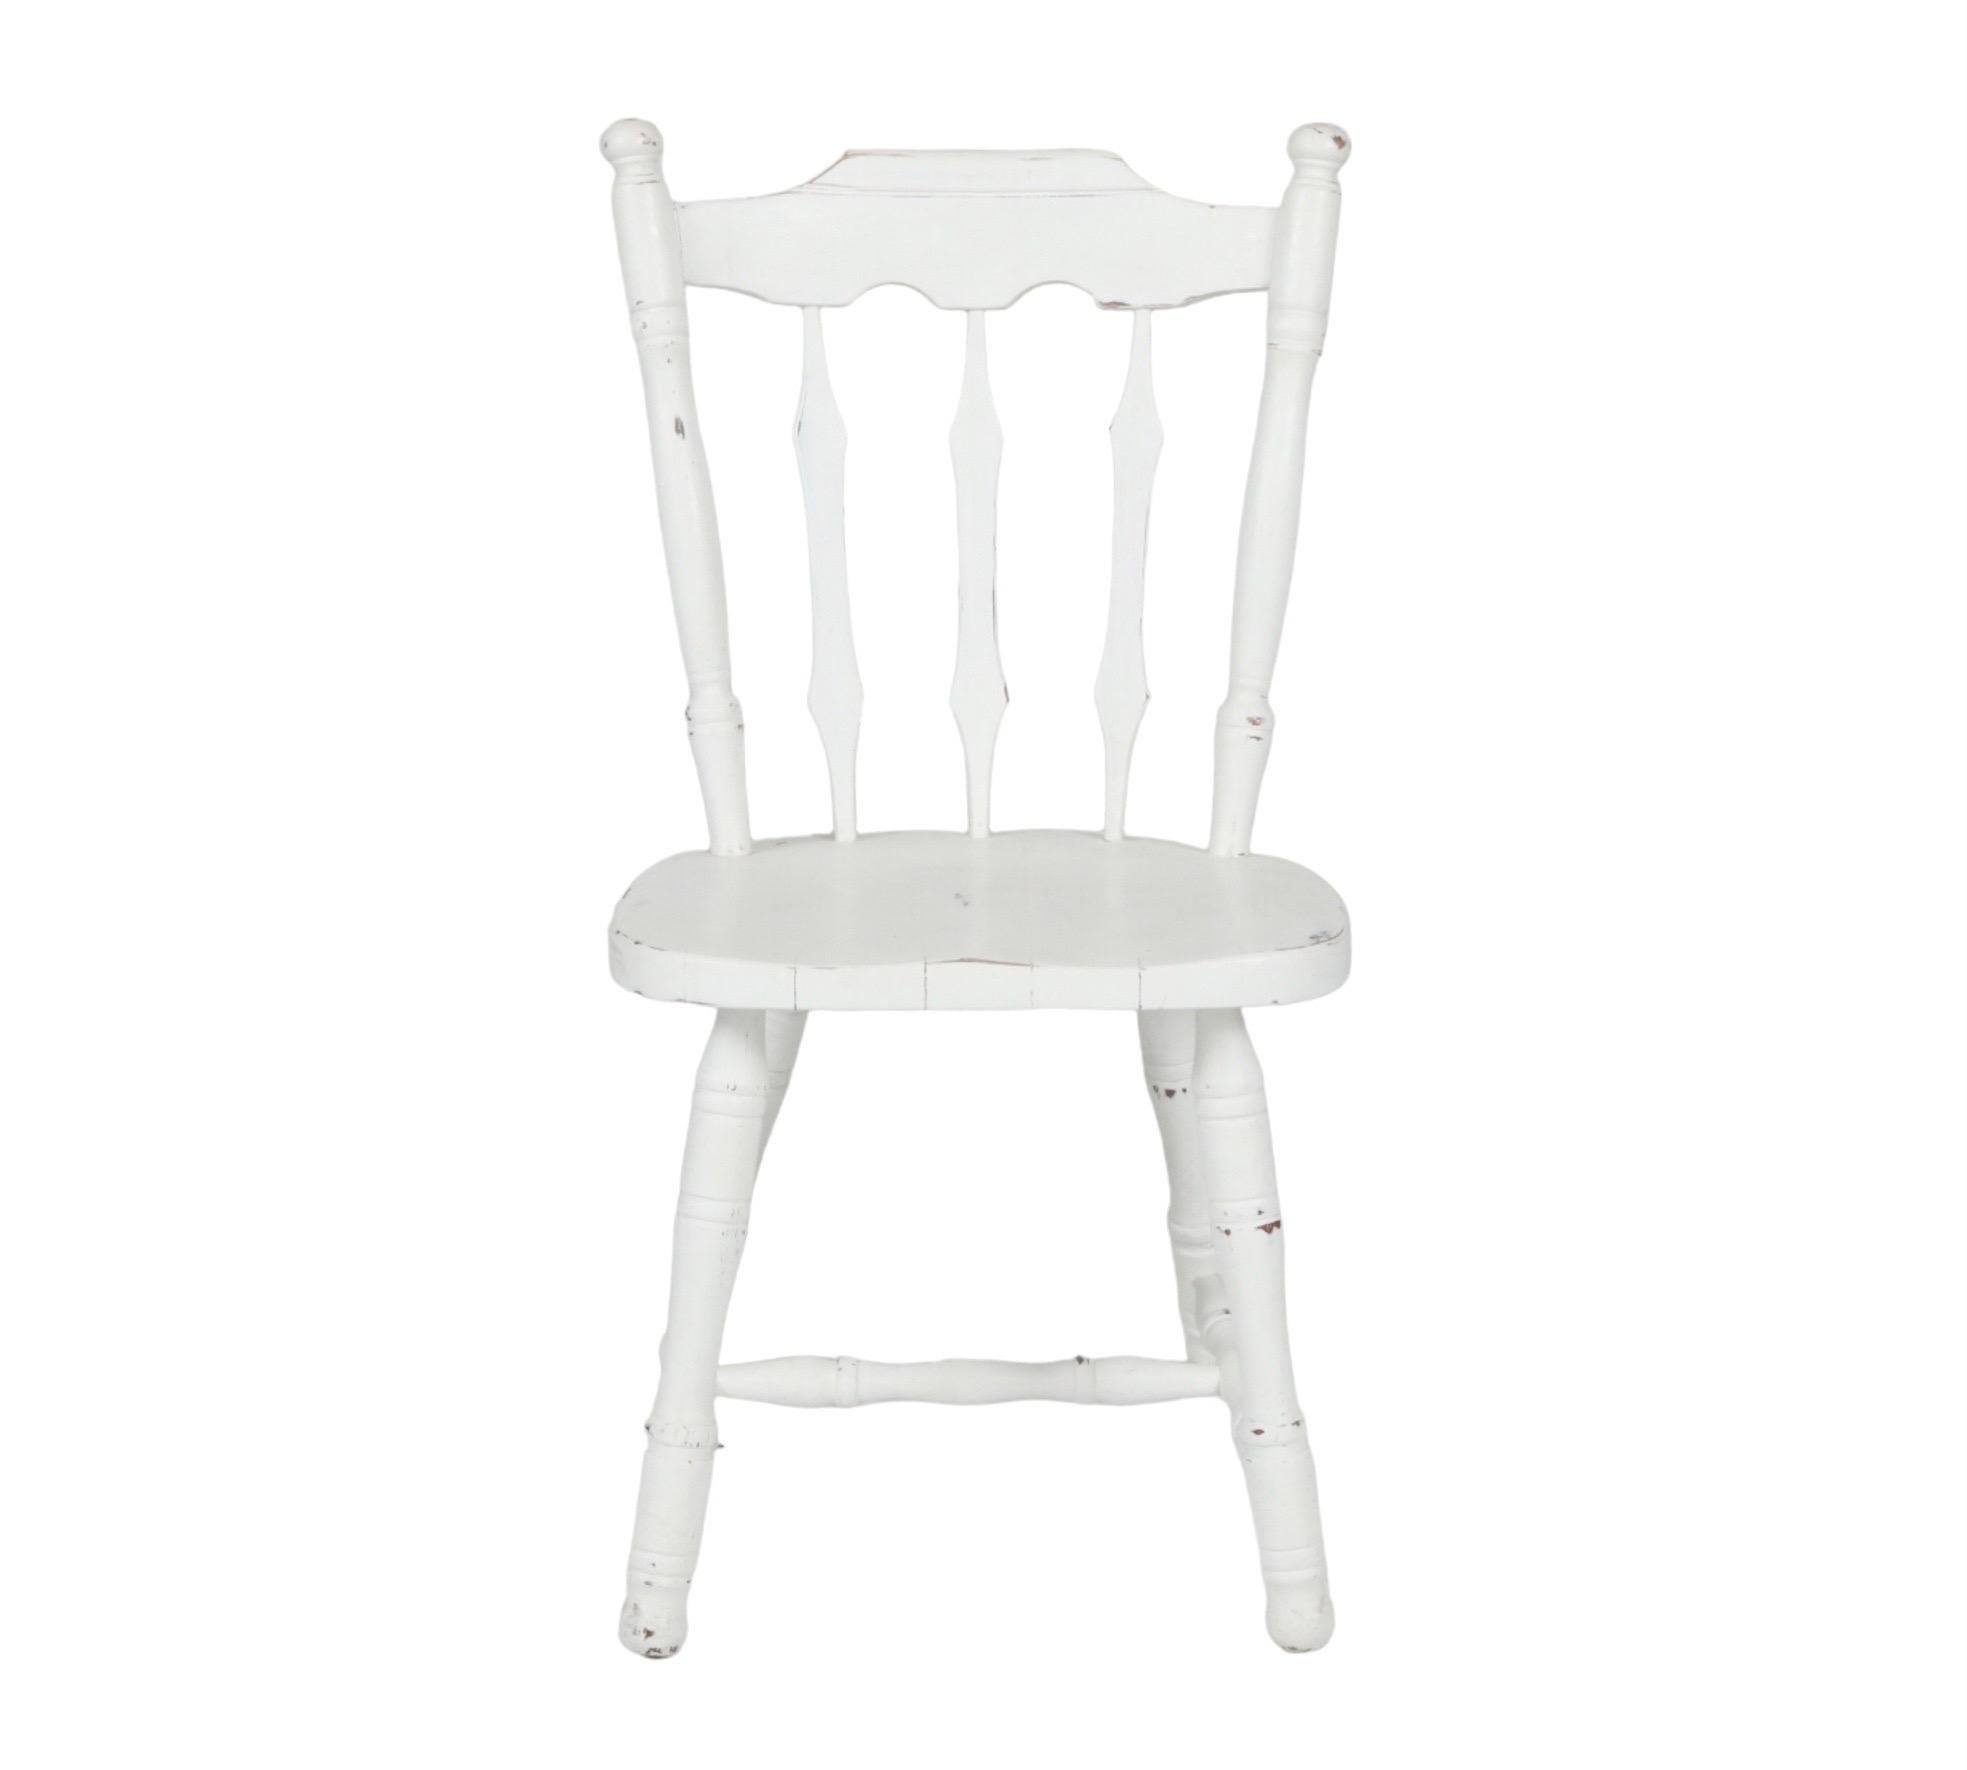 American White Farmhouse Table with Four Chairs